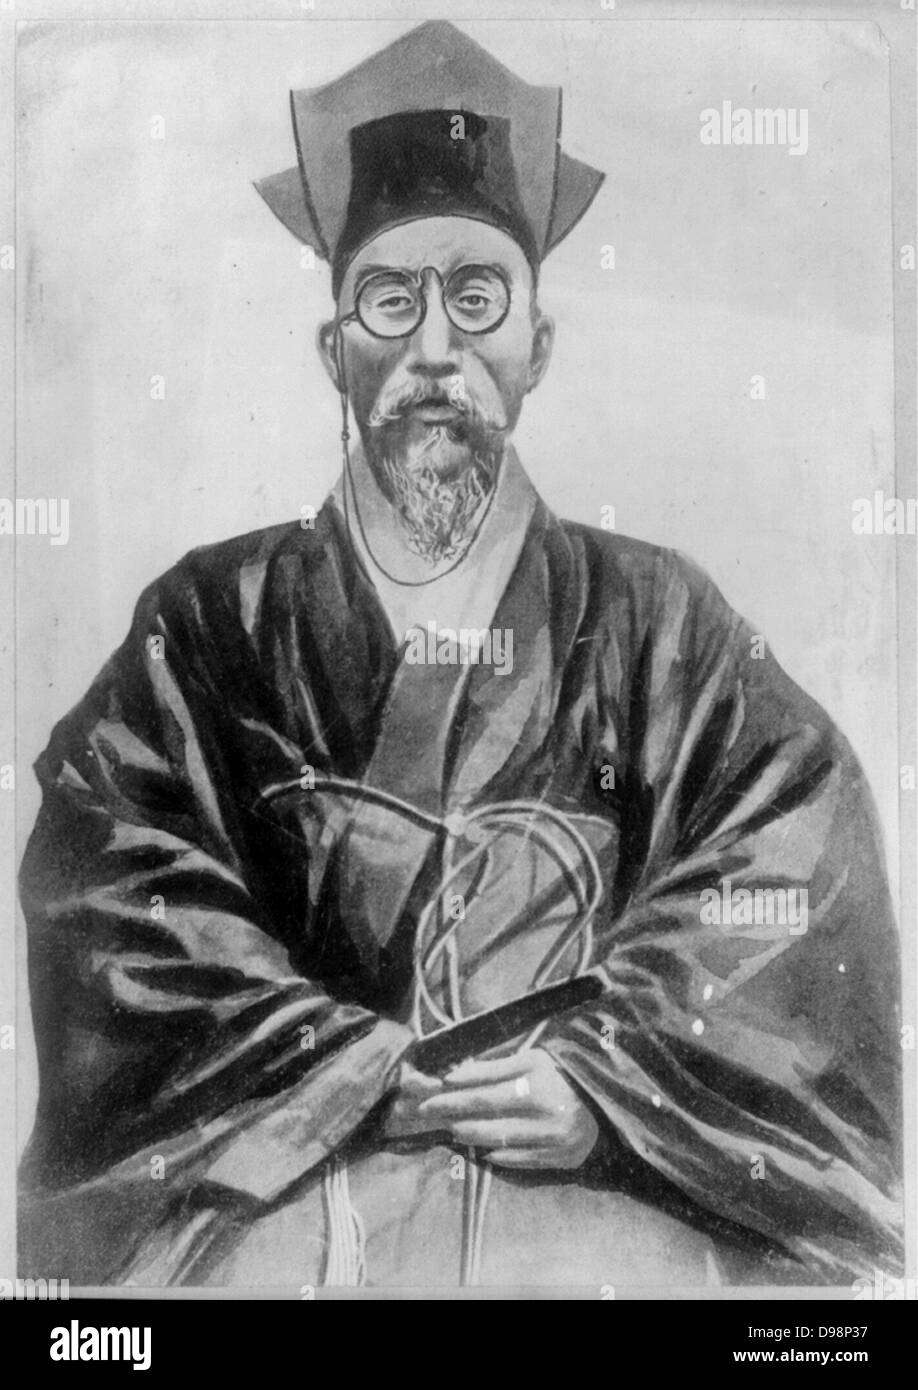 Kojong, Emperor of Korea (1852-1919). Three-quarter length portrait of Emperor, wearing spectacles, seated looking forwards. Stock Photo